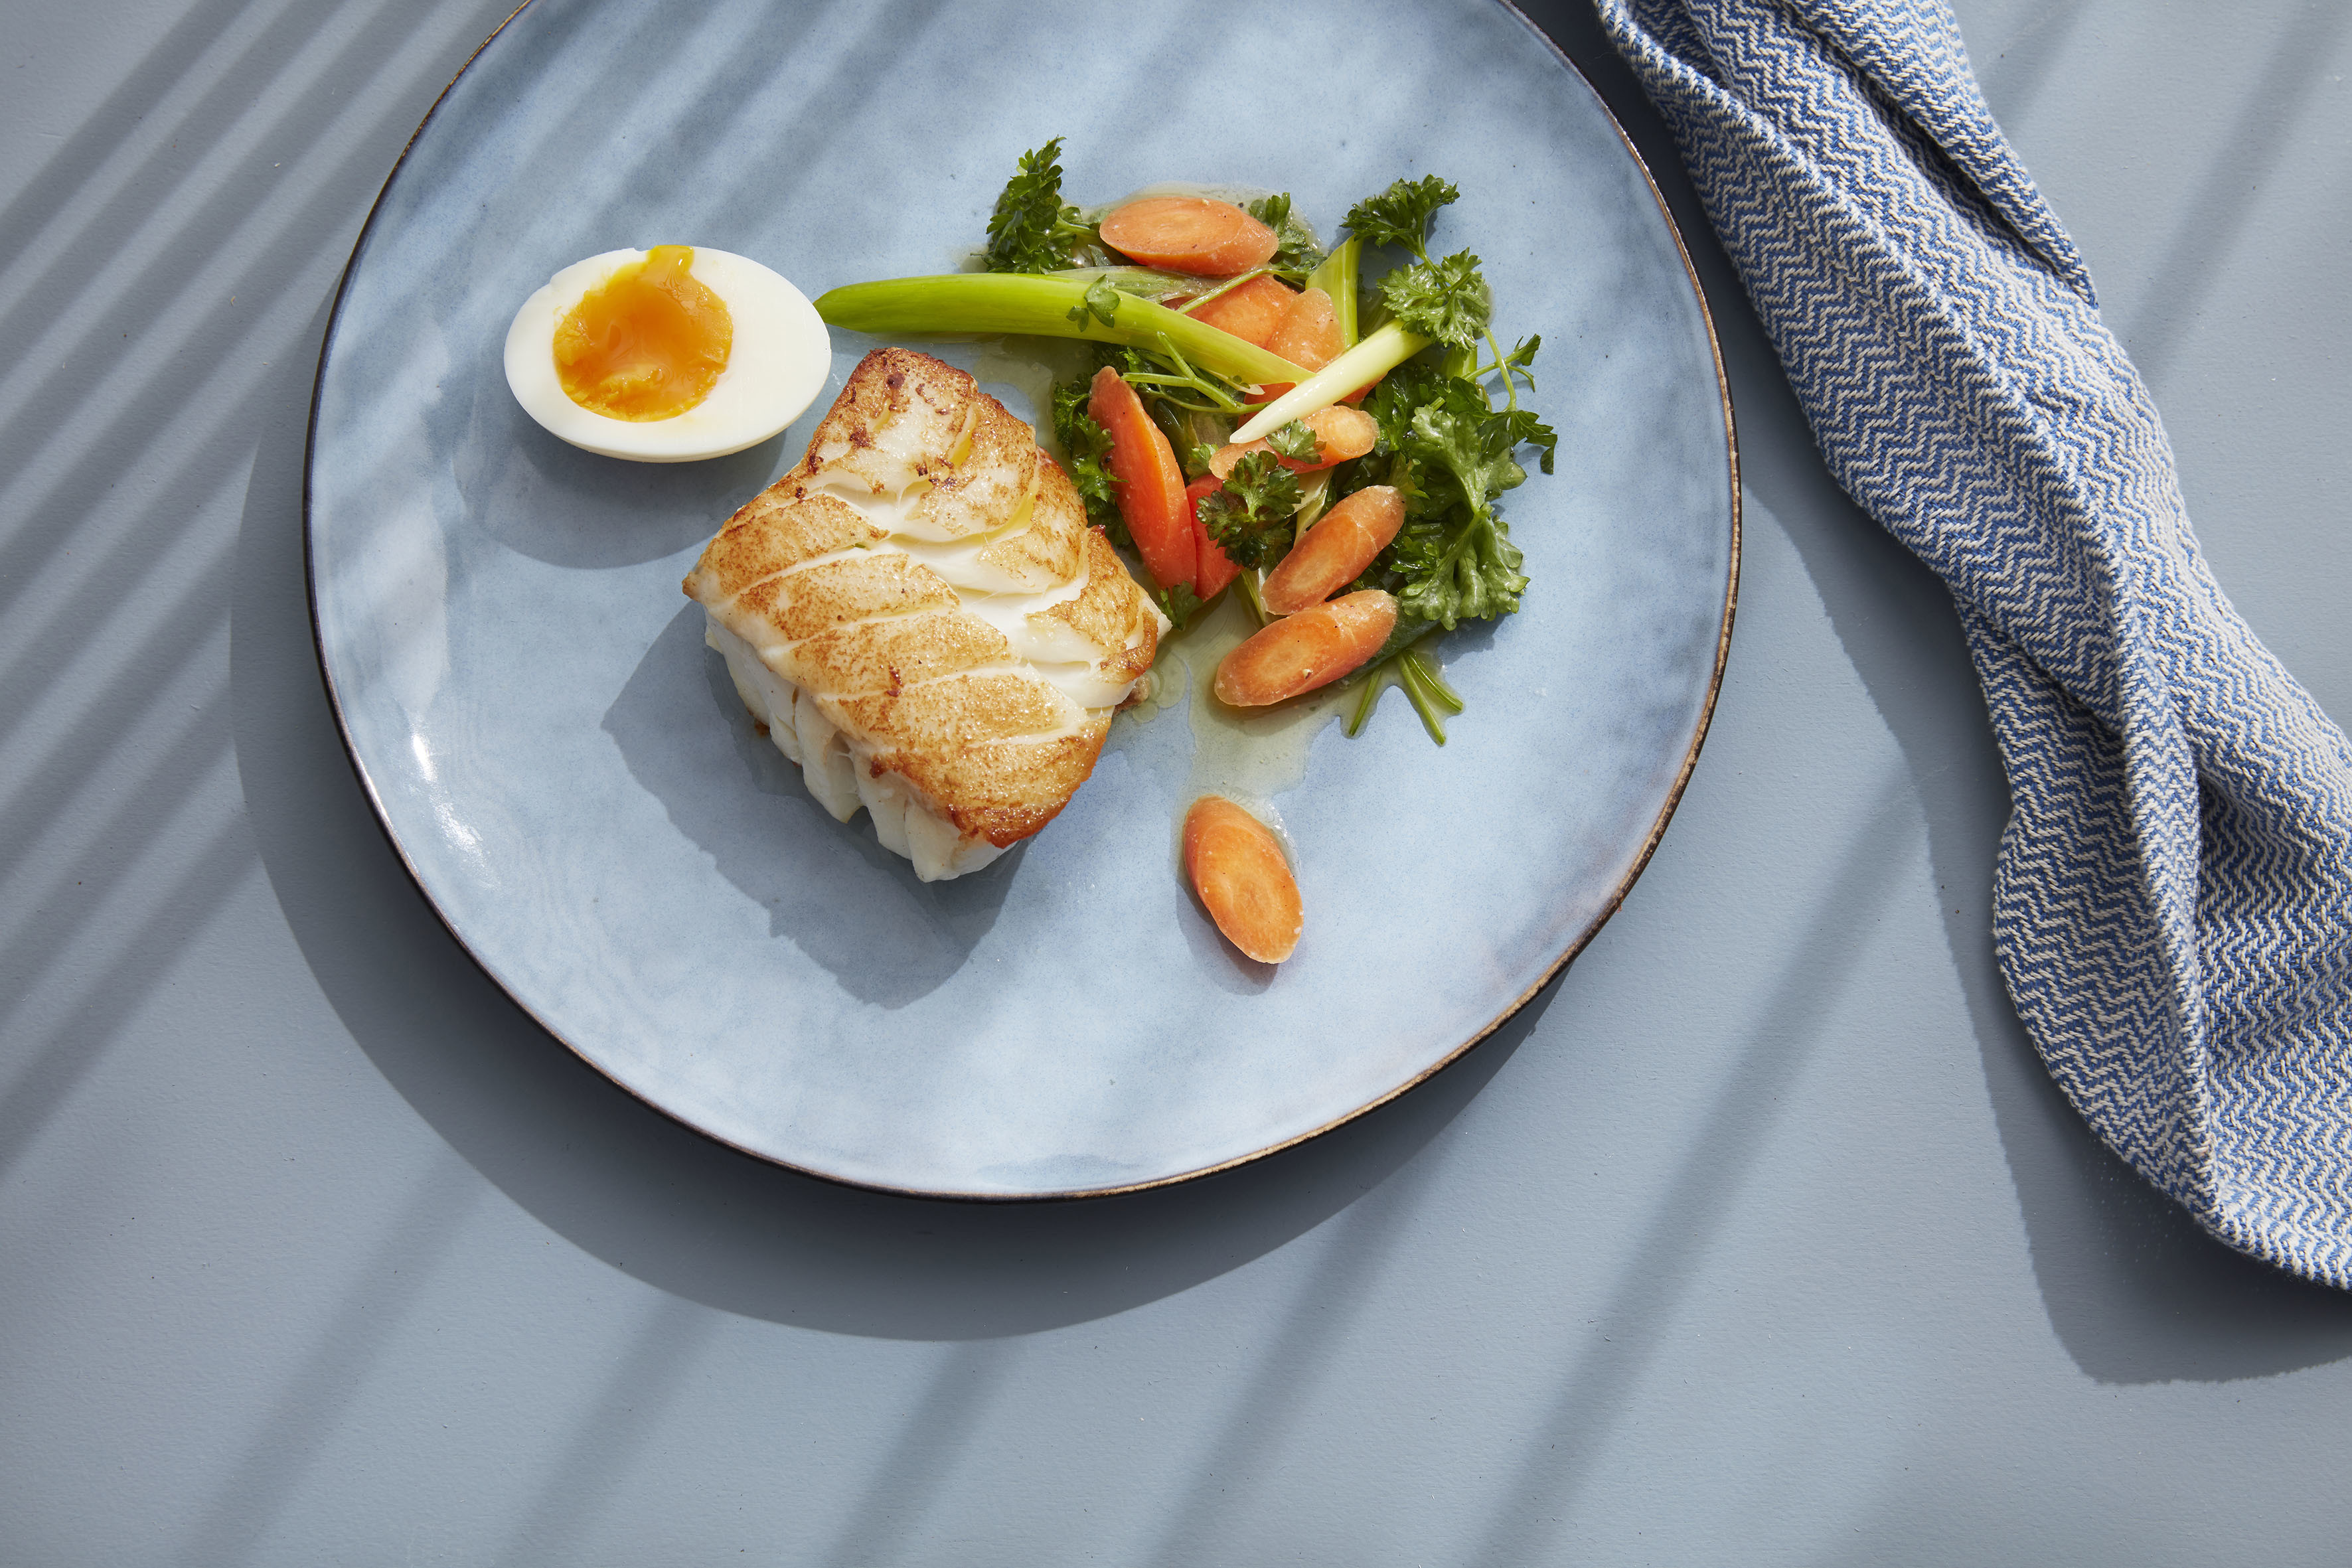 Cod with egg and vegetables on a plate